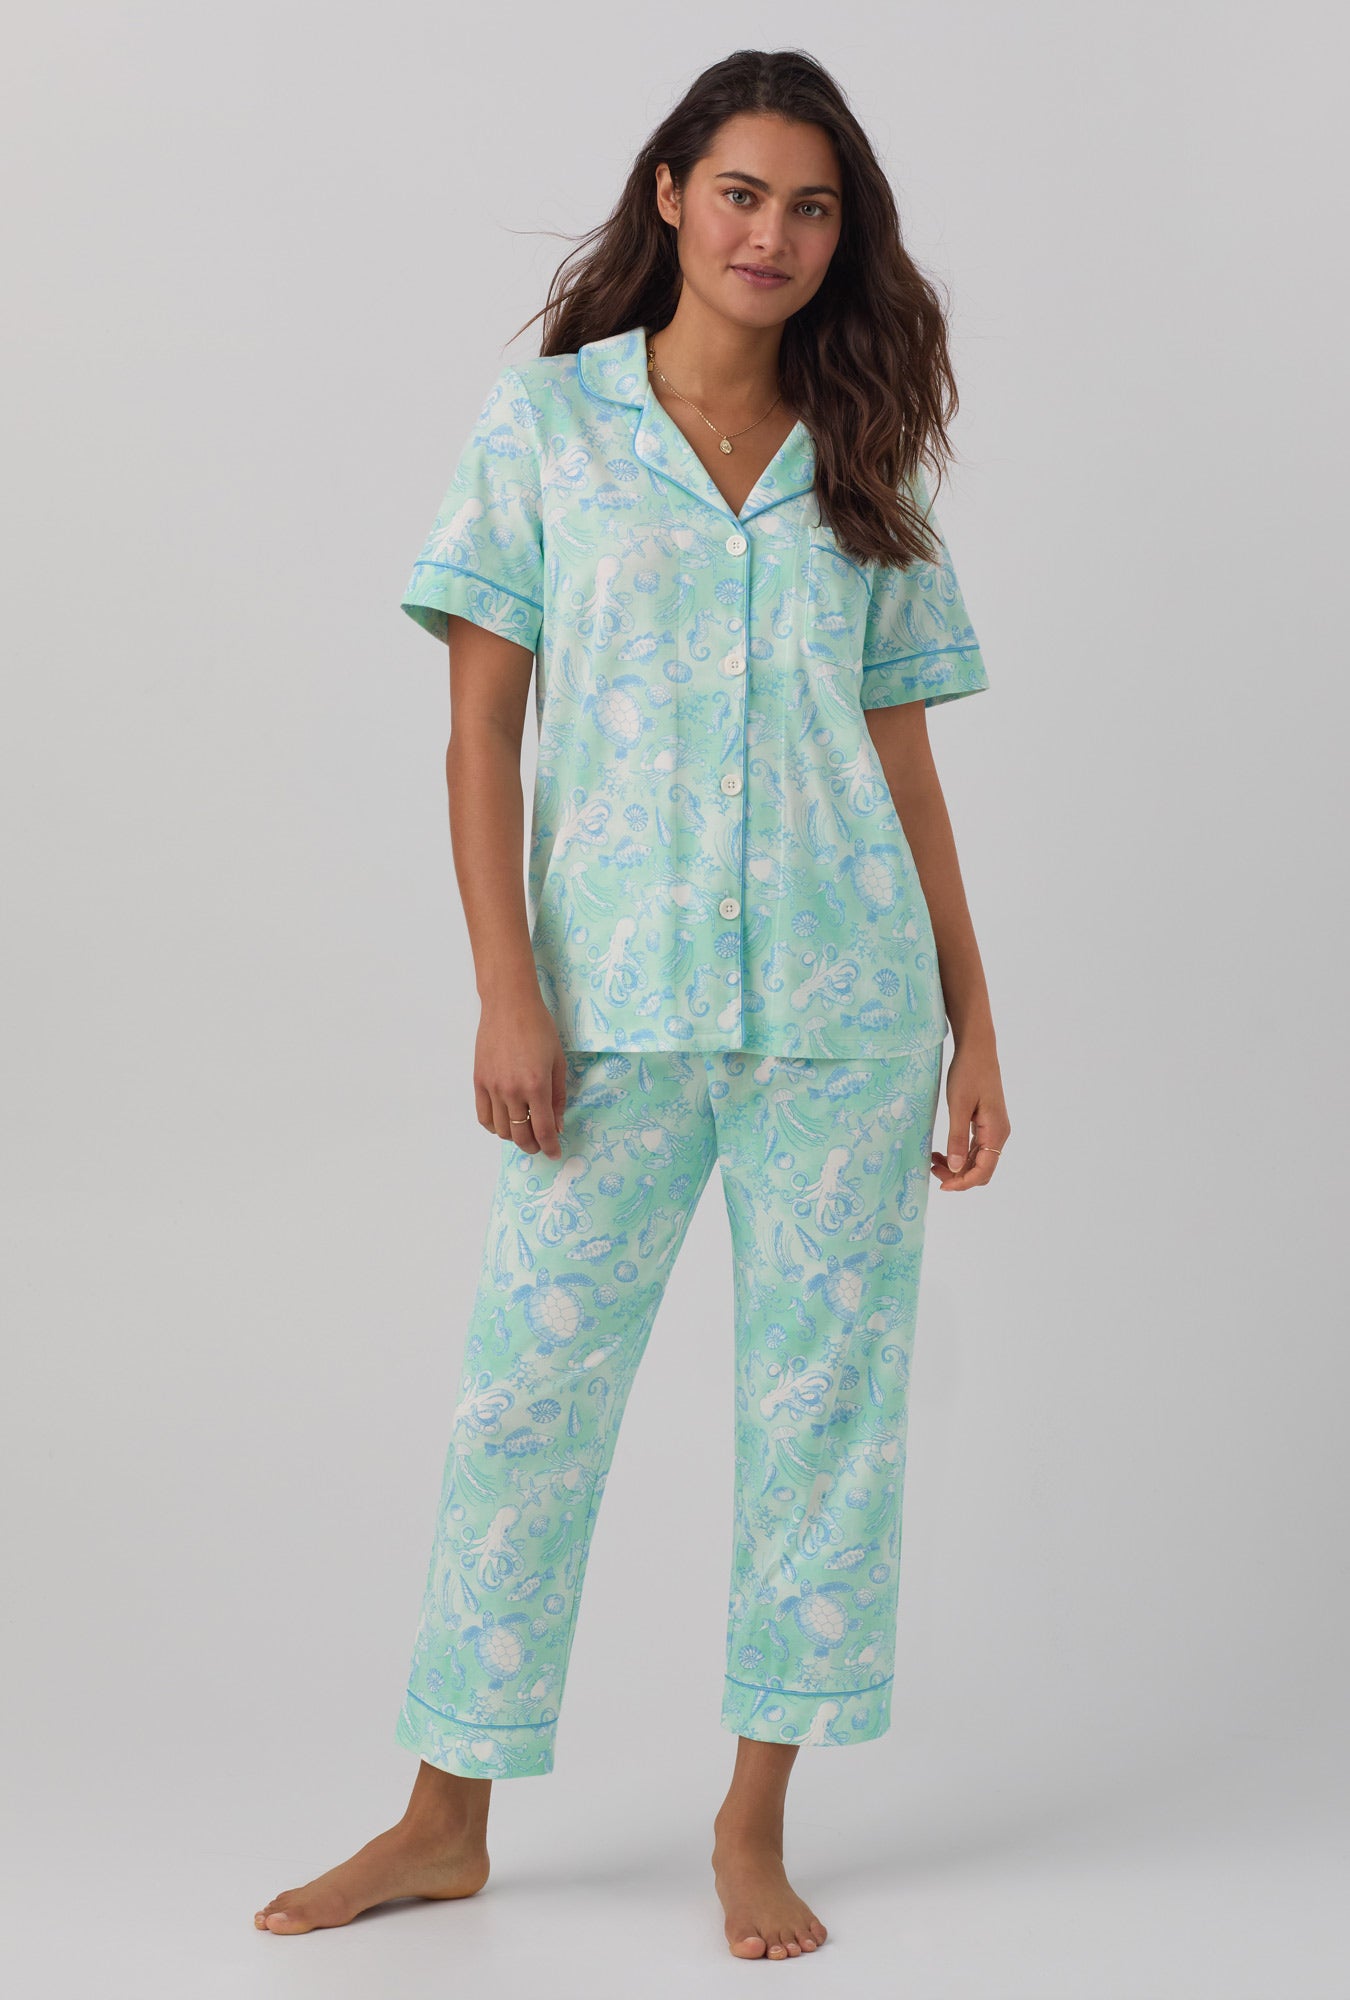 A lady wearing short sleeve stretch jersey cropped pj set with aquatic life print